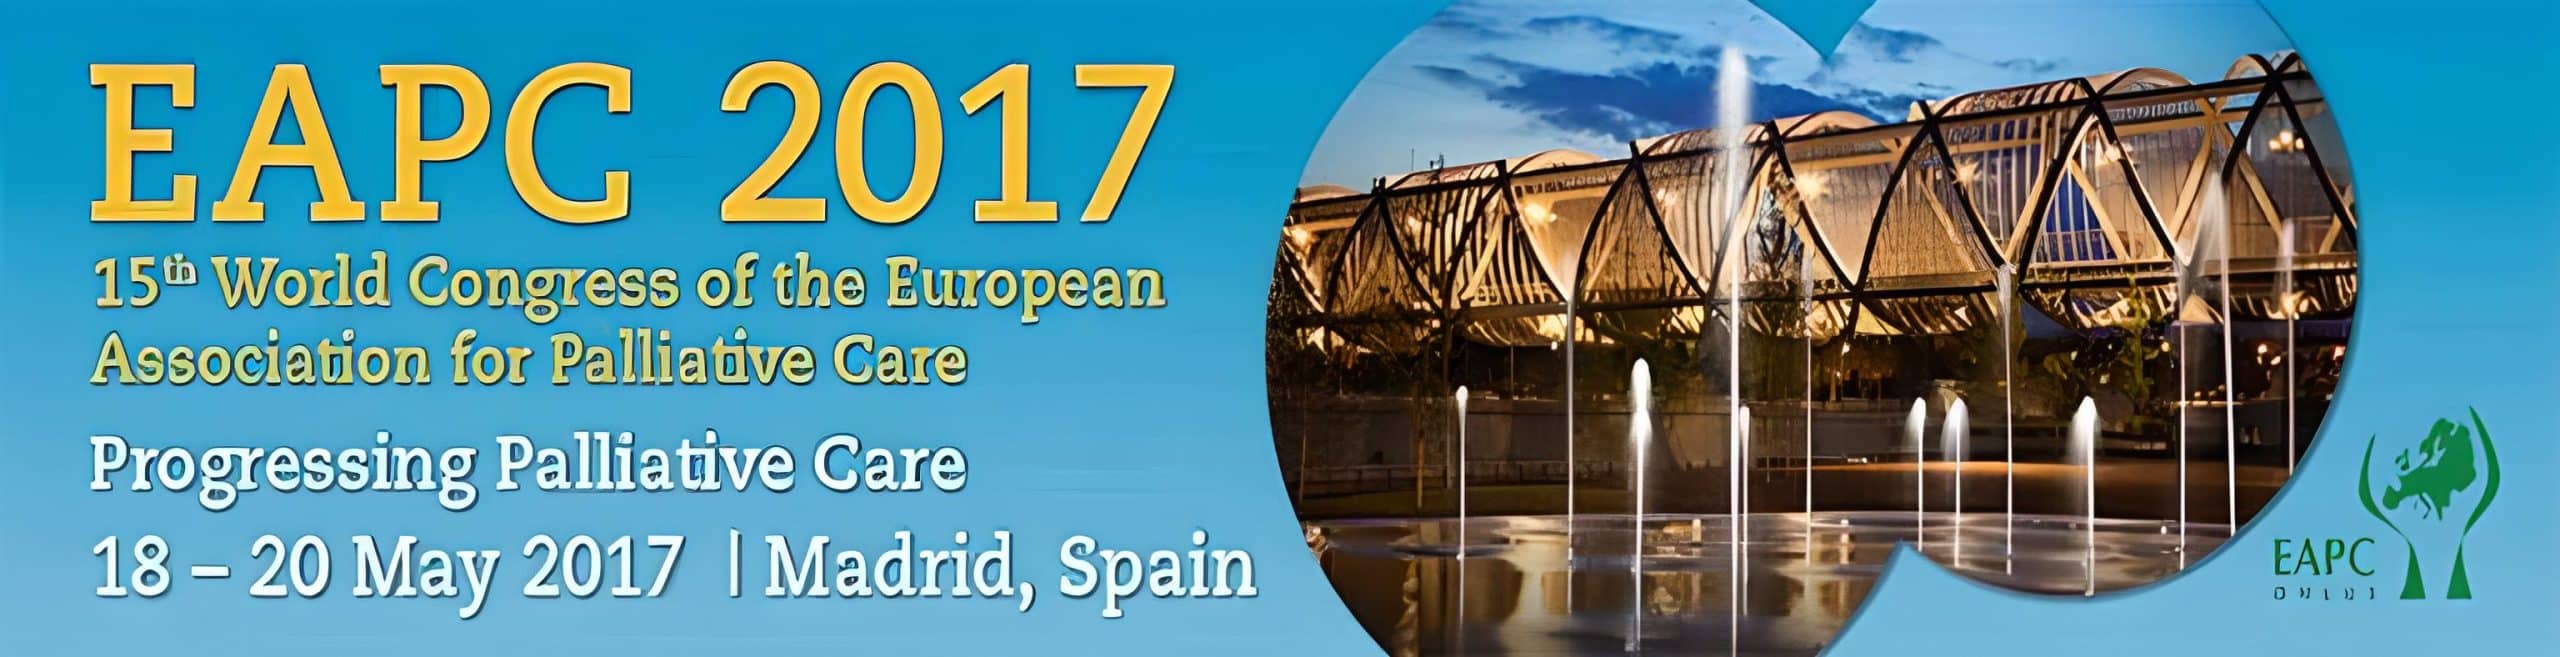 banner 15th world congress of the EAPC Progressing Palliative Care 18-20 May 2017 Madrid